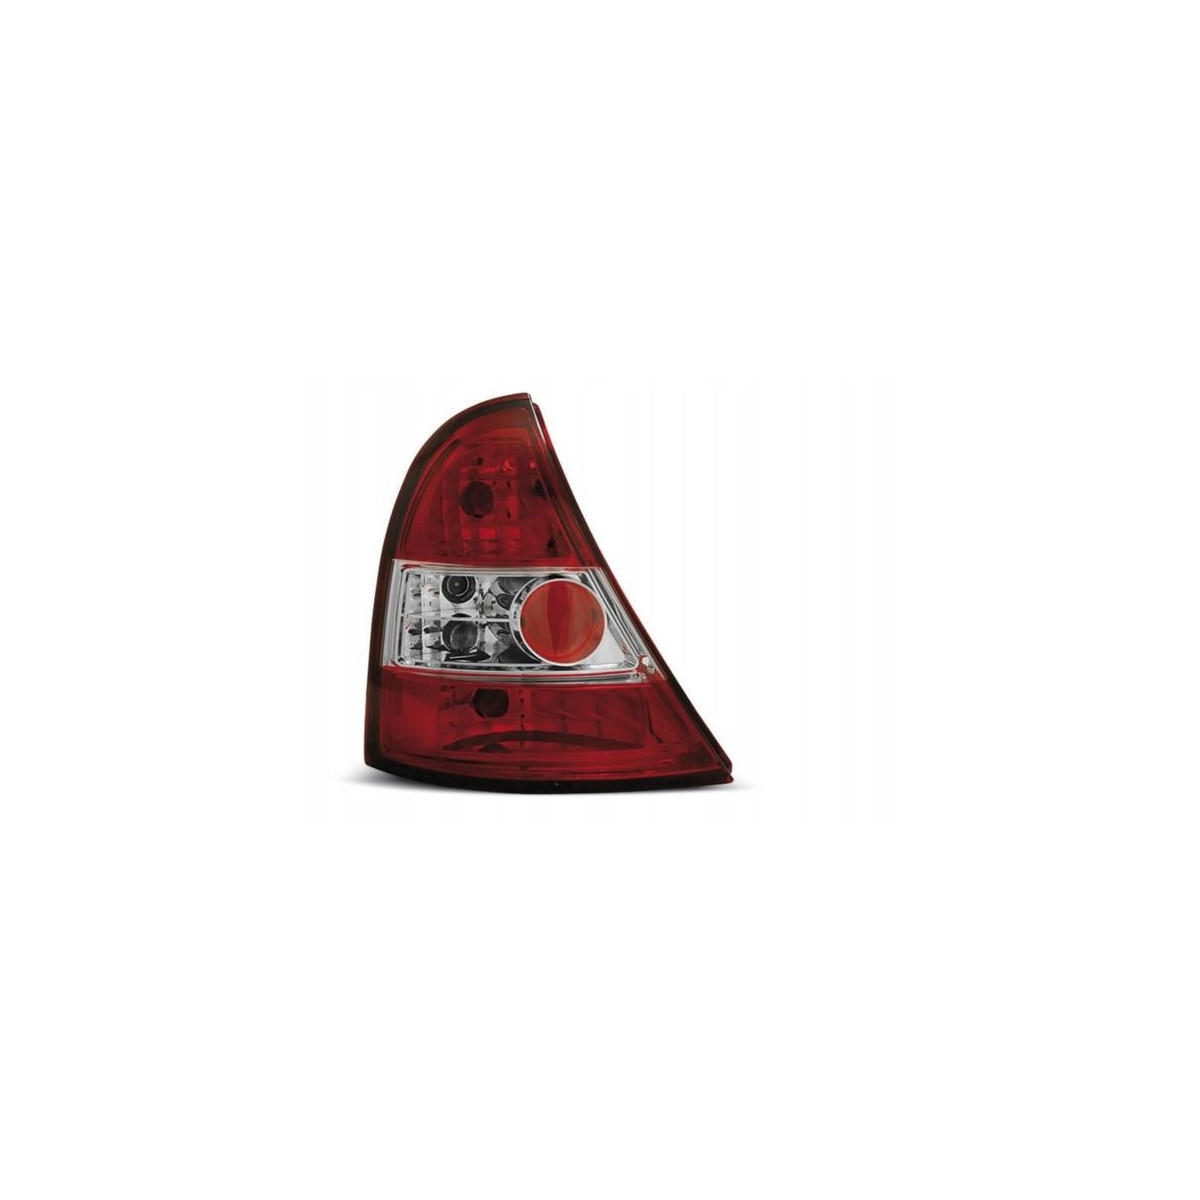 LAMPY TYLNE RENAULT CLIO II 98-01 CLEAR RED WHITE